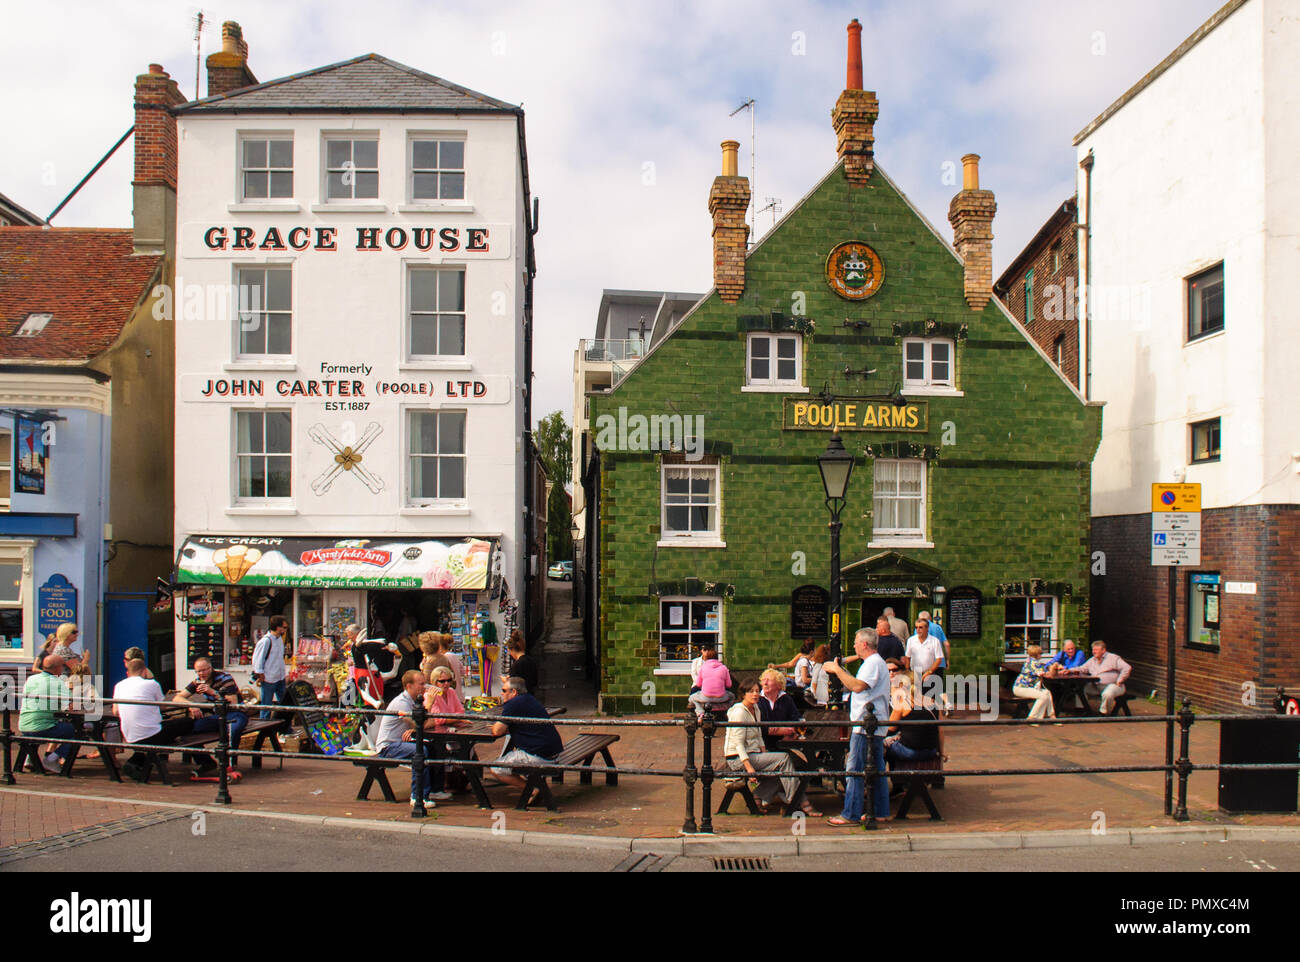 Poole, England, UK - July 30, 2011: Punters drink at picnic benches outside the Poole Arms pub on the Quay in Poole, Dorset. Stock Photo